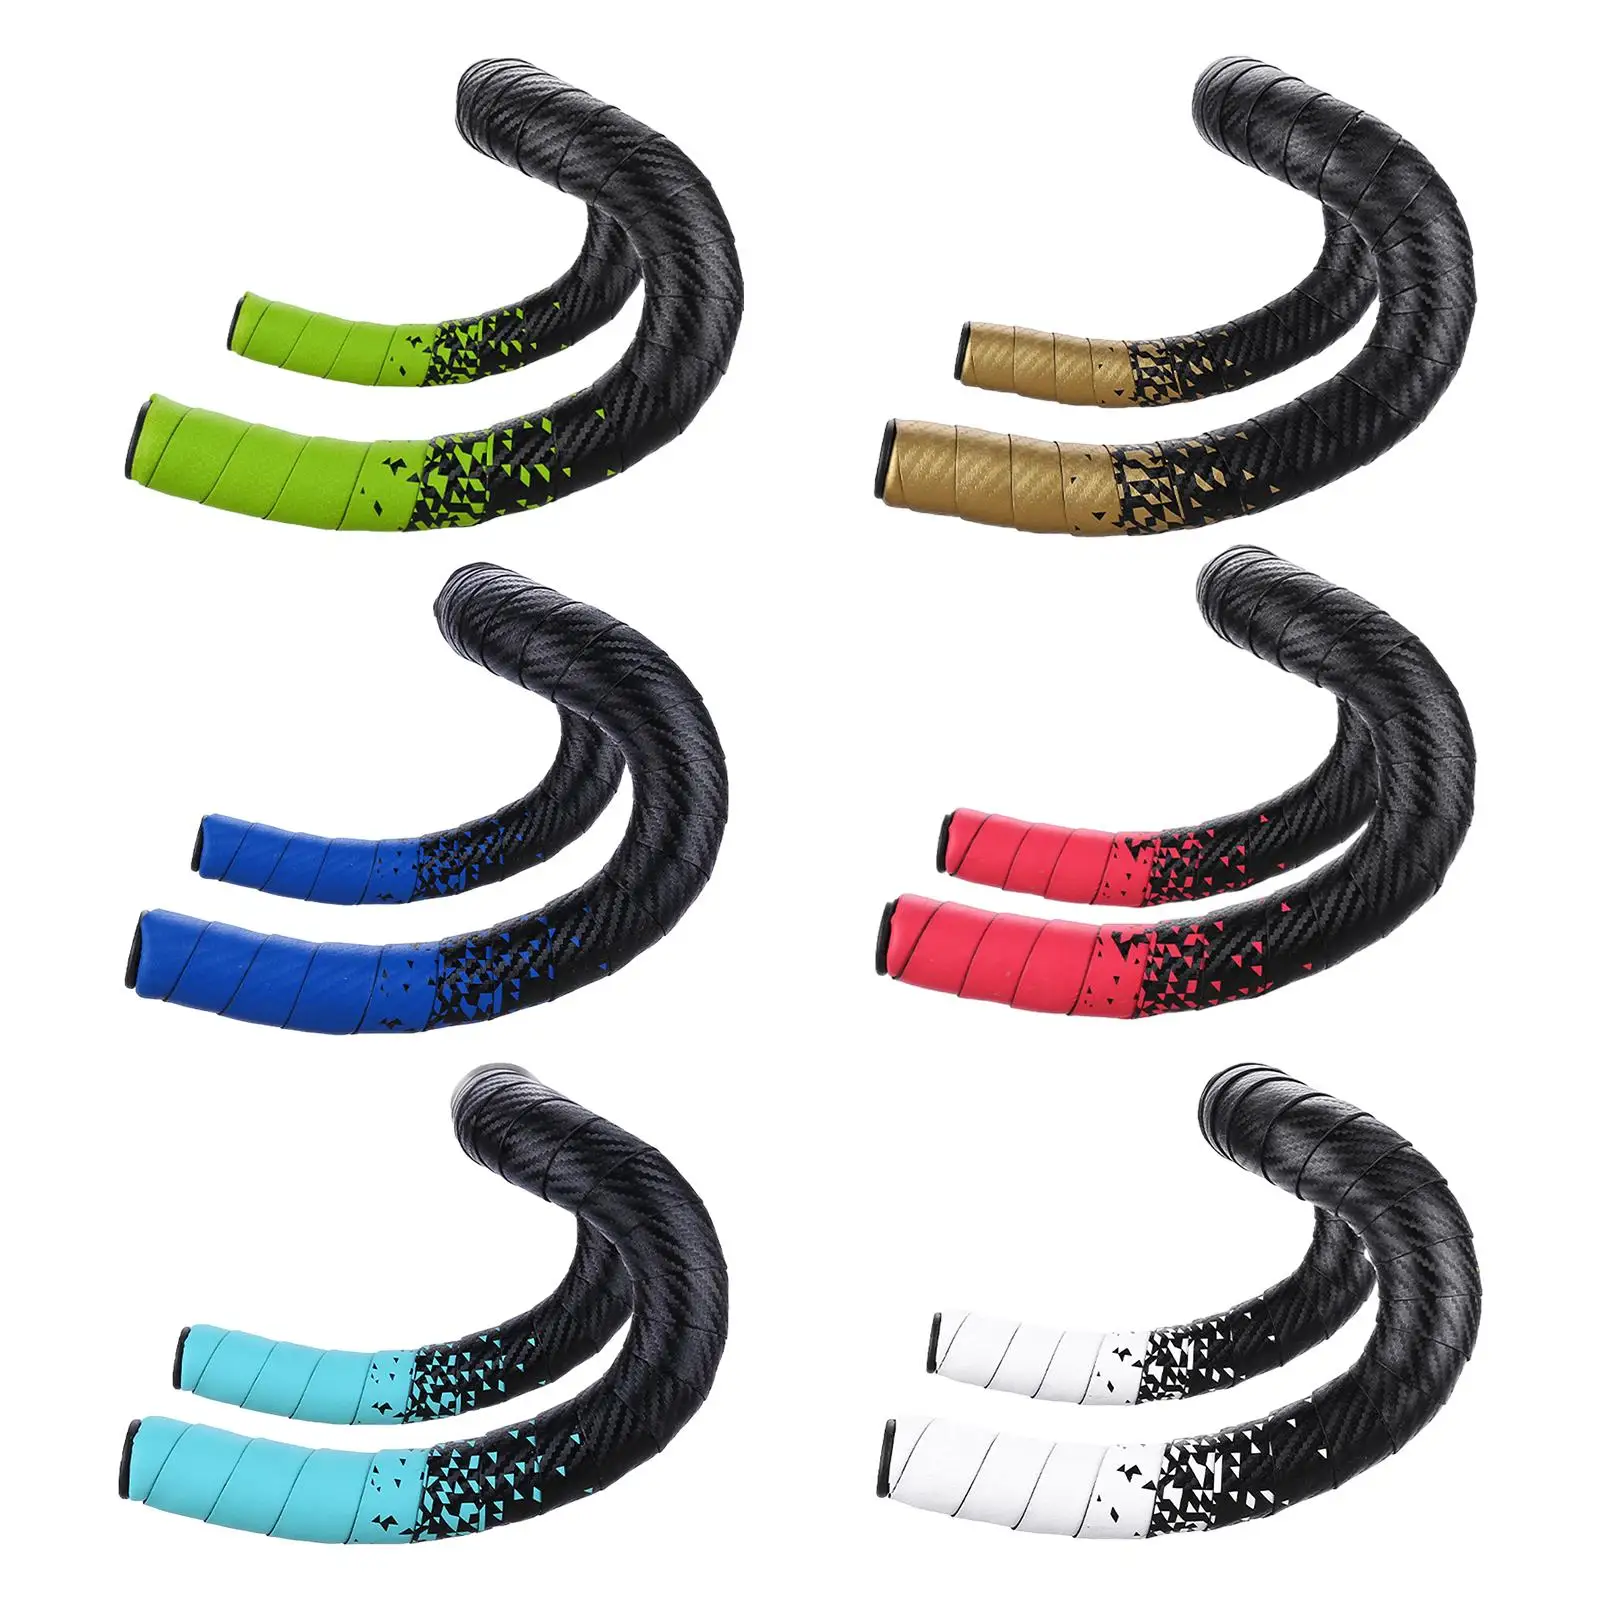 Bike Handlebar Tape Sweat Absorbent with Bar End Plugs Bicycle Bar Tape for Outdoor BMX Fixed Gear Bicycle Mountain Bikes Biking